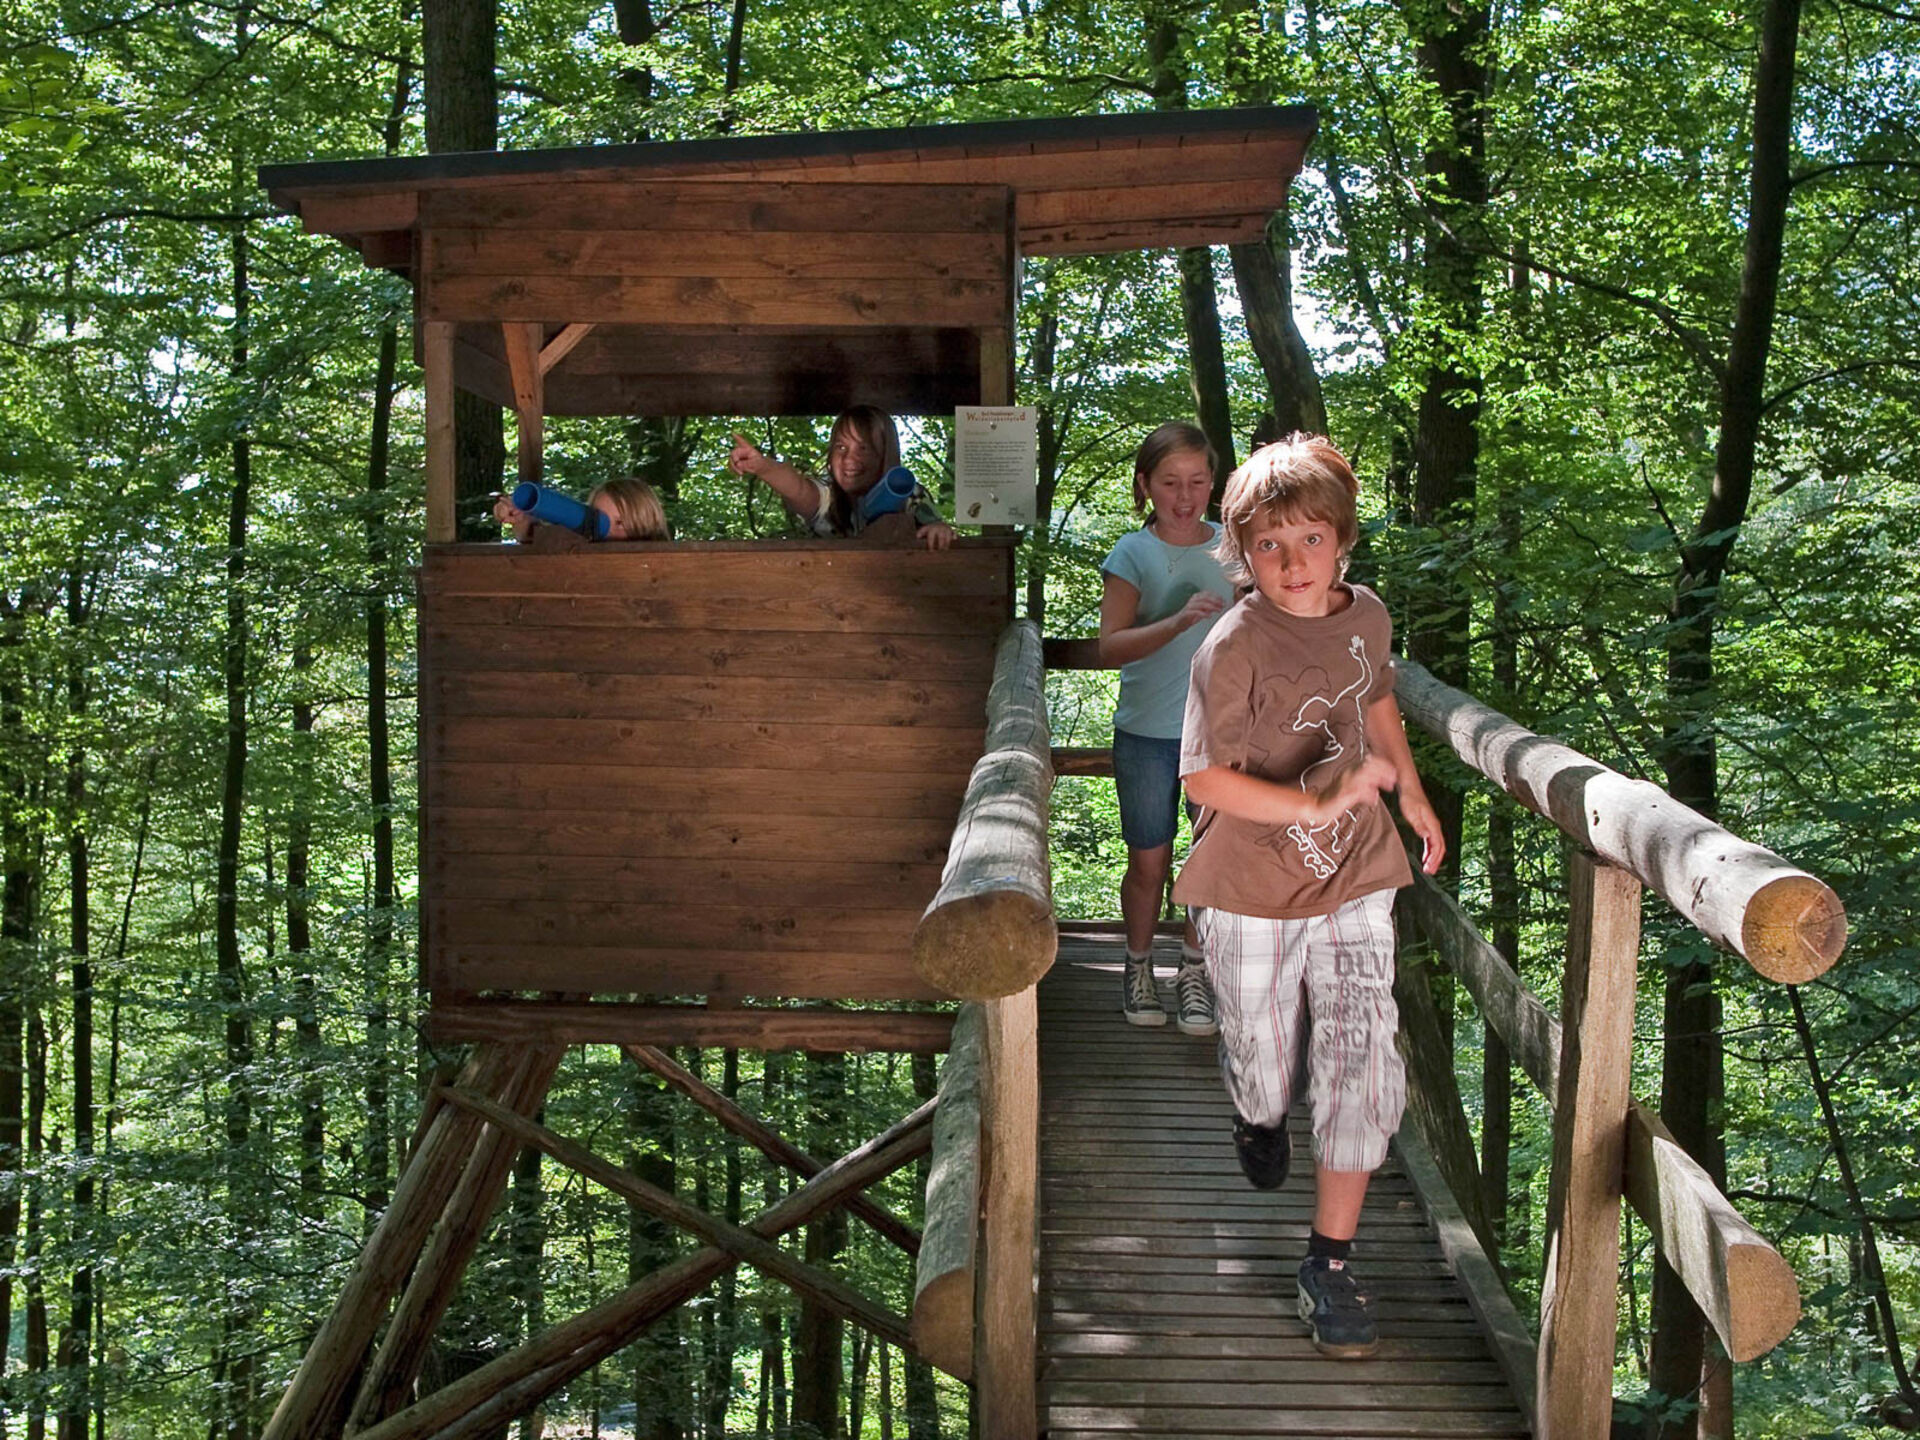 Children on the forest adventure trail in Bad Fredeburg in the Sauerland